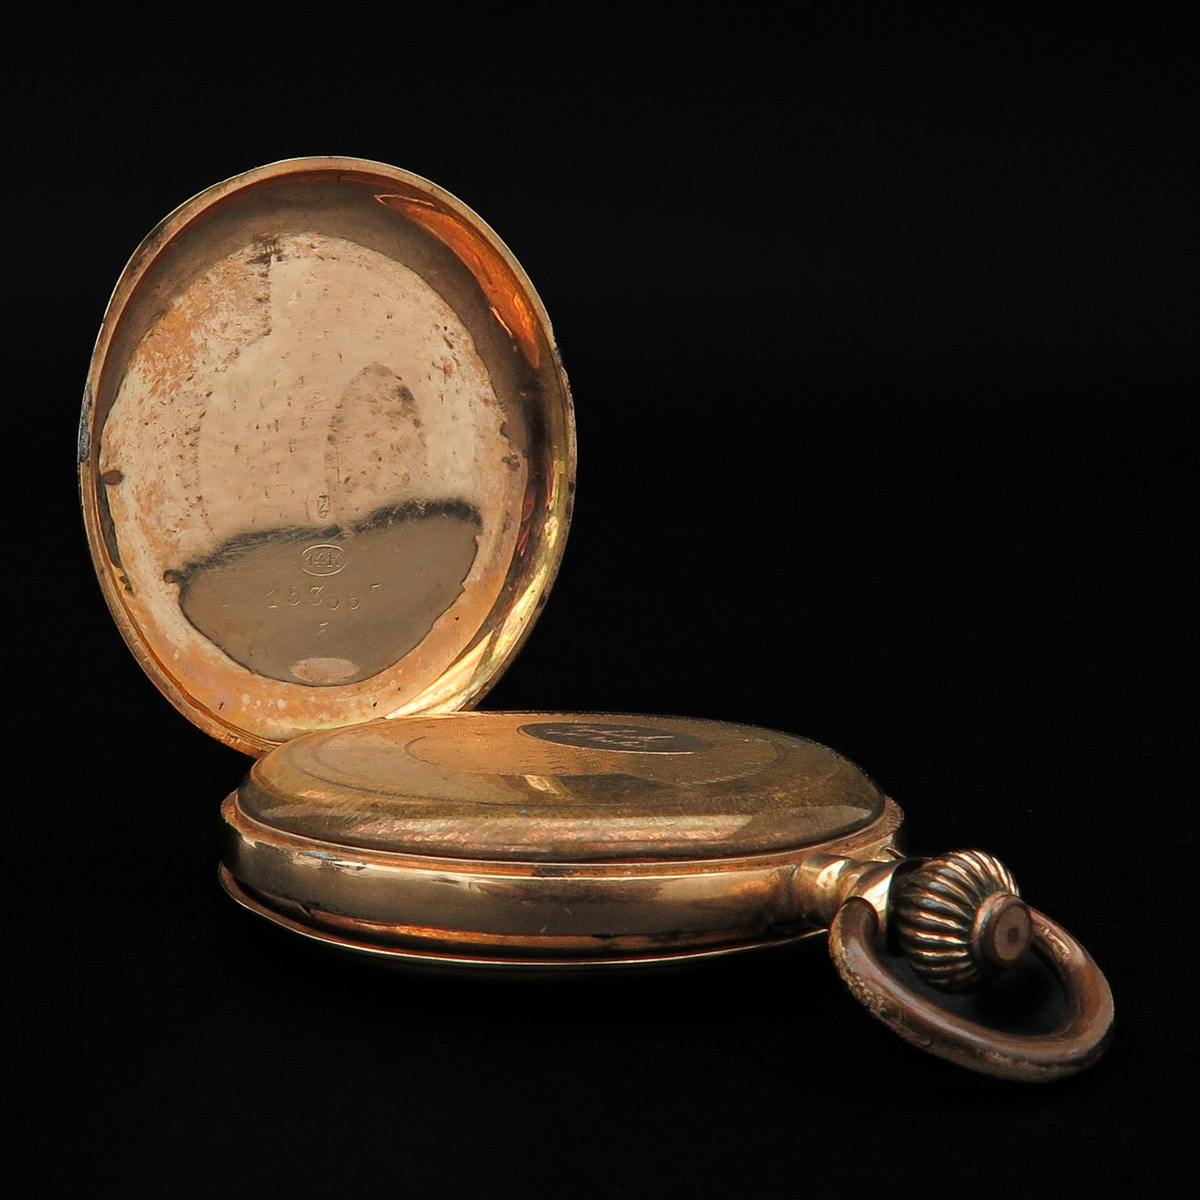 A Collection of 9 Pocket Watches - Image 10 of 10